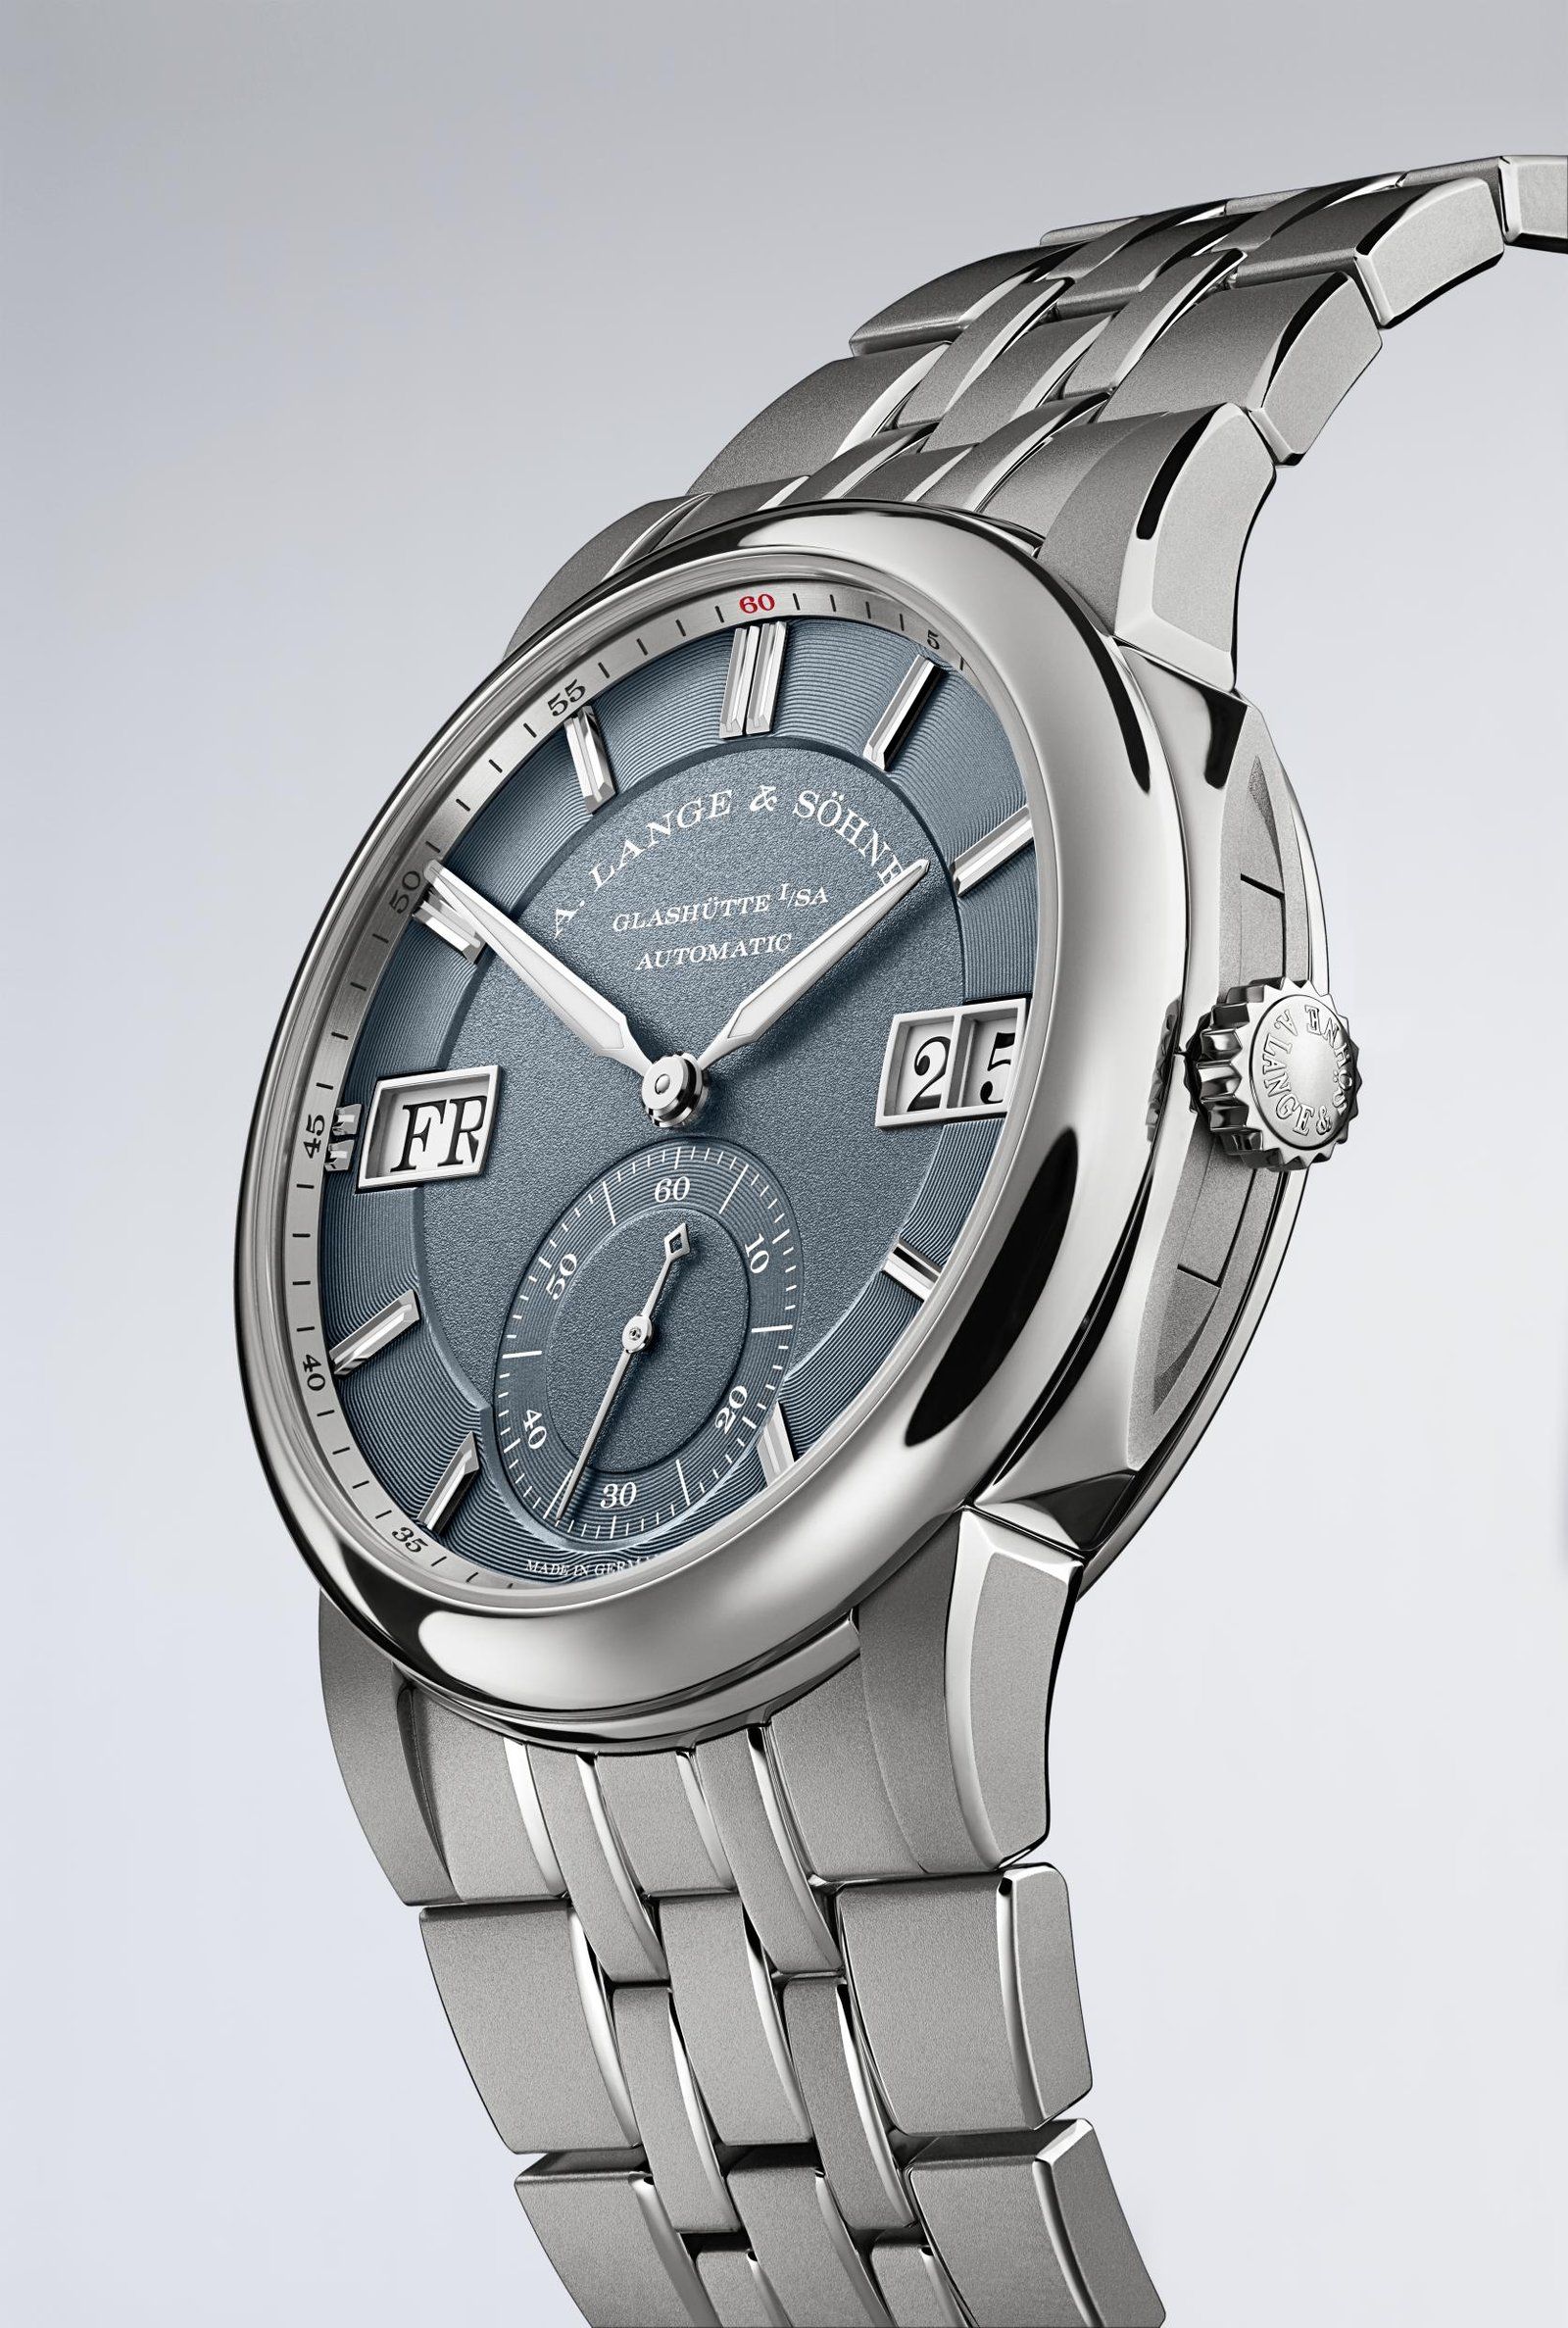 Odysseus has always been a landmark timepiece for A. Lange & Sohne. It was the brand’s first series of watches crafted in stainless steel. And in 2022, the same timepiece is the first to be produced in platinum. A. Lange and Sohne gives due attention to the properties of the materials it employs. In doing so, the brand reinforces the primary characteristic that has kept its luxury watches abreast: optimum quality. I guess the Odysseus can no longer be characterised as just another integrated sports steel watch.